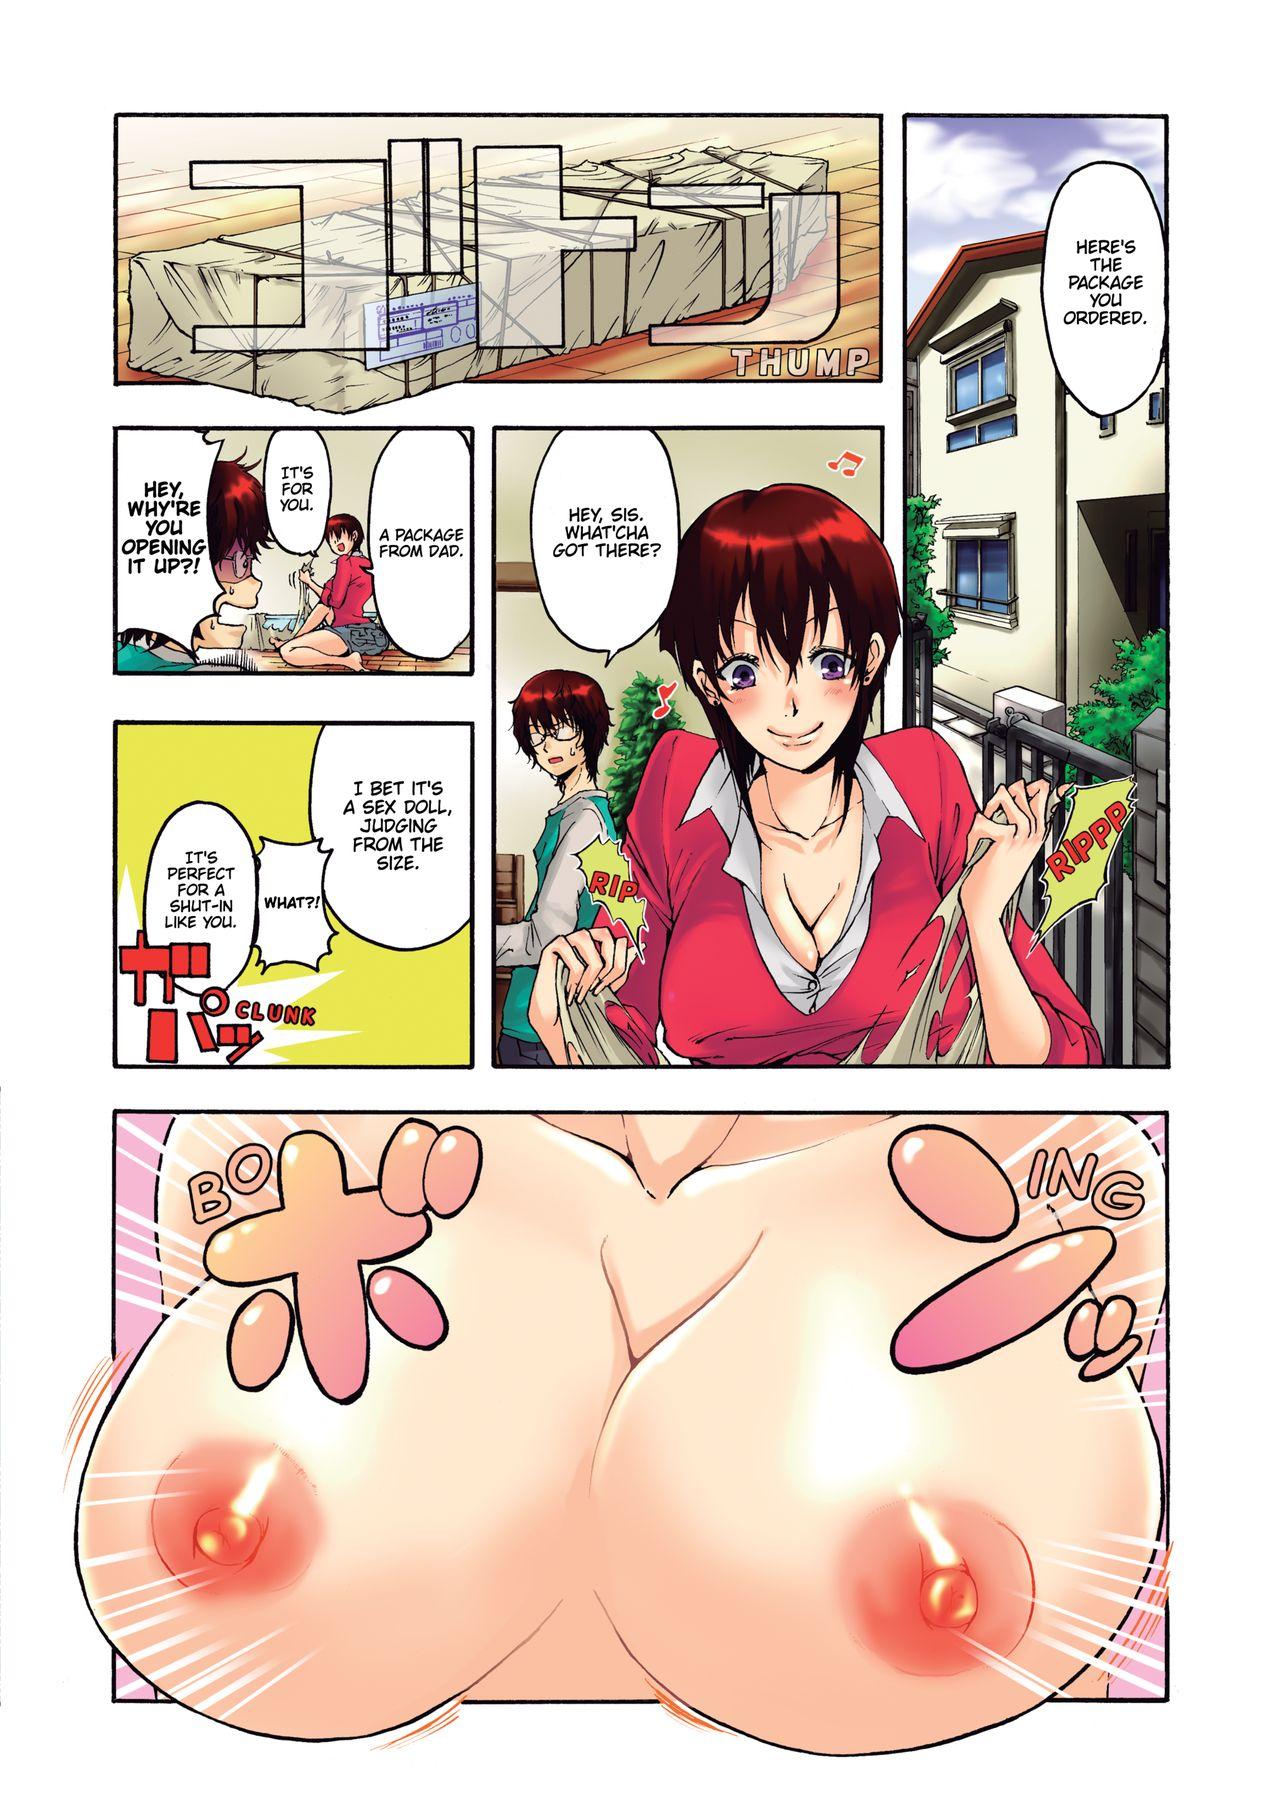 Letsdoeit Aigan Robot Lilly - Pet Robot Lilly 1 Free Fuck - Page 7